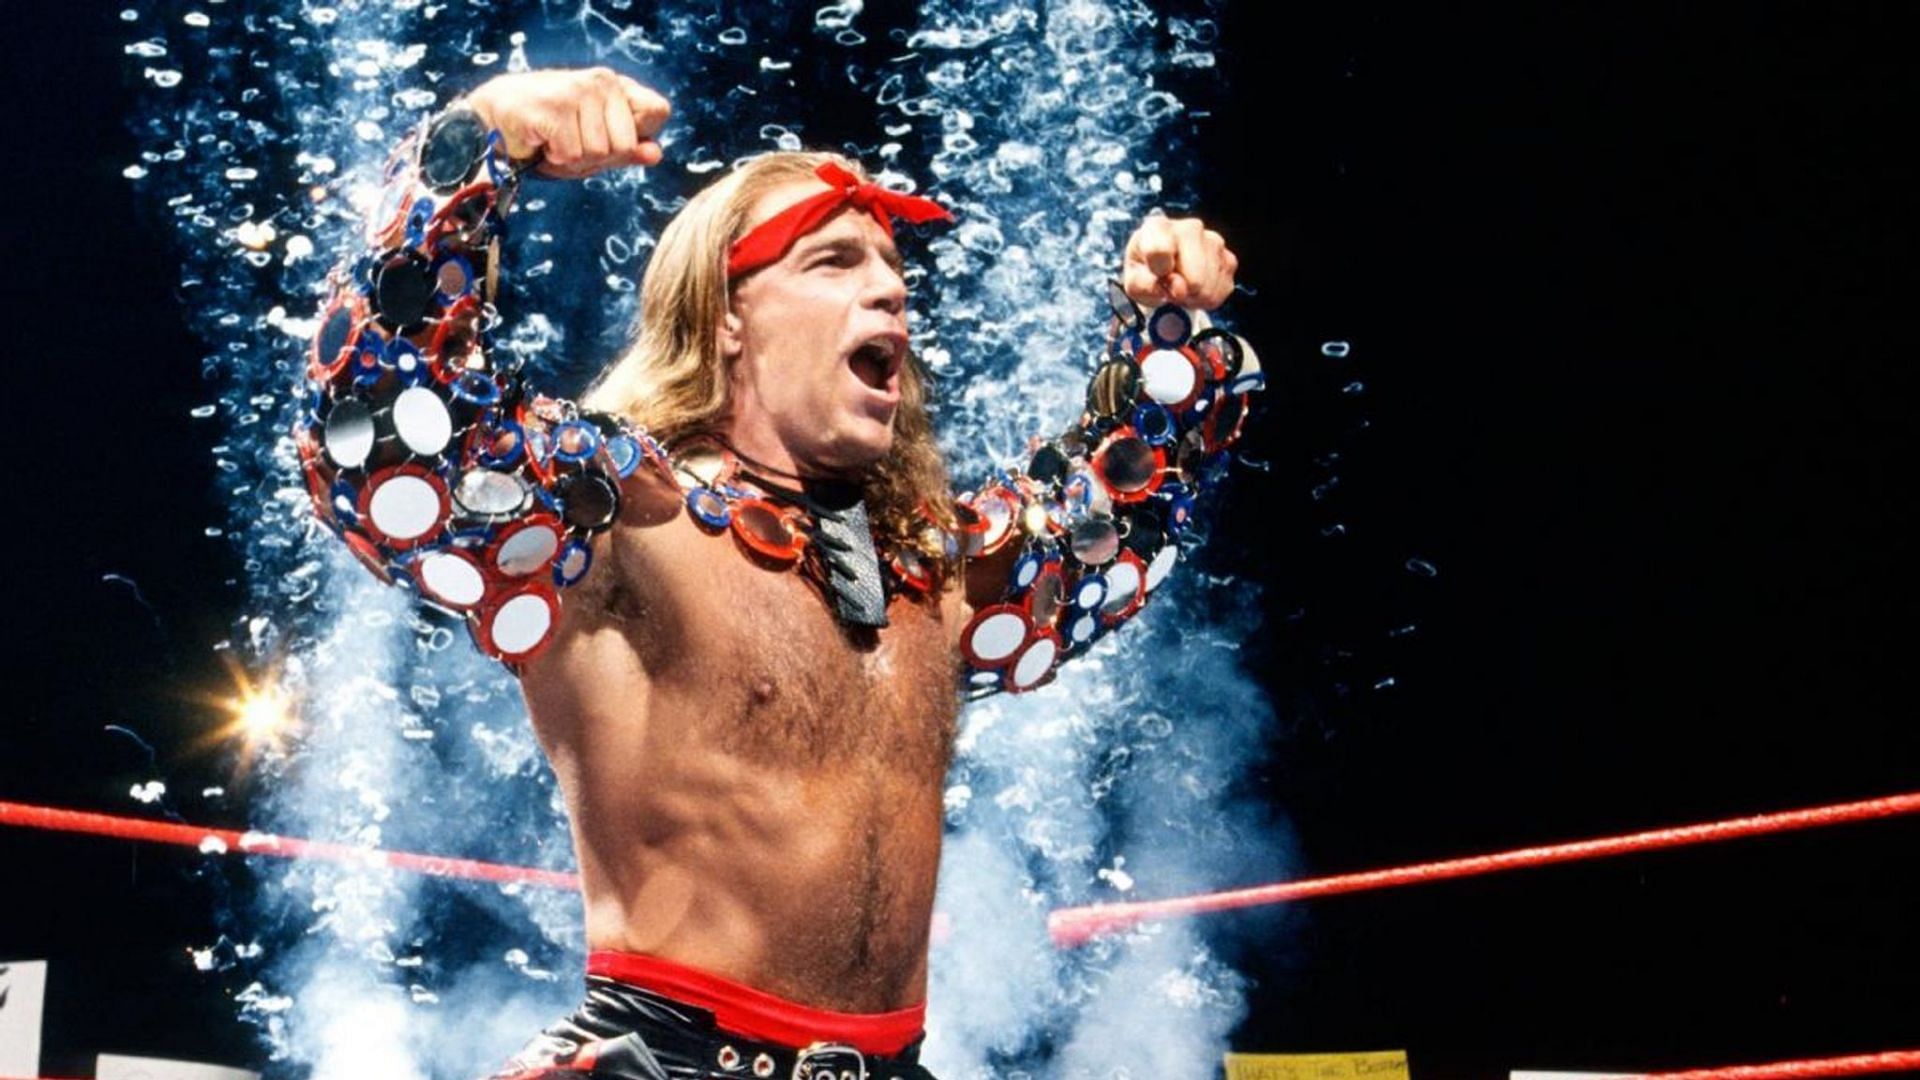 Shawn Michaels is considered by many to be the greatest performer in WWE